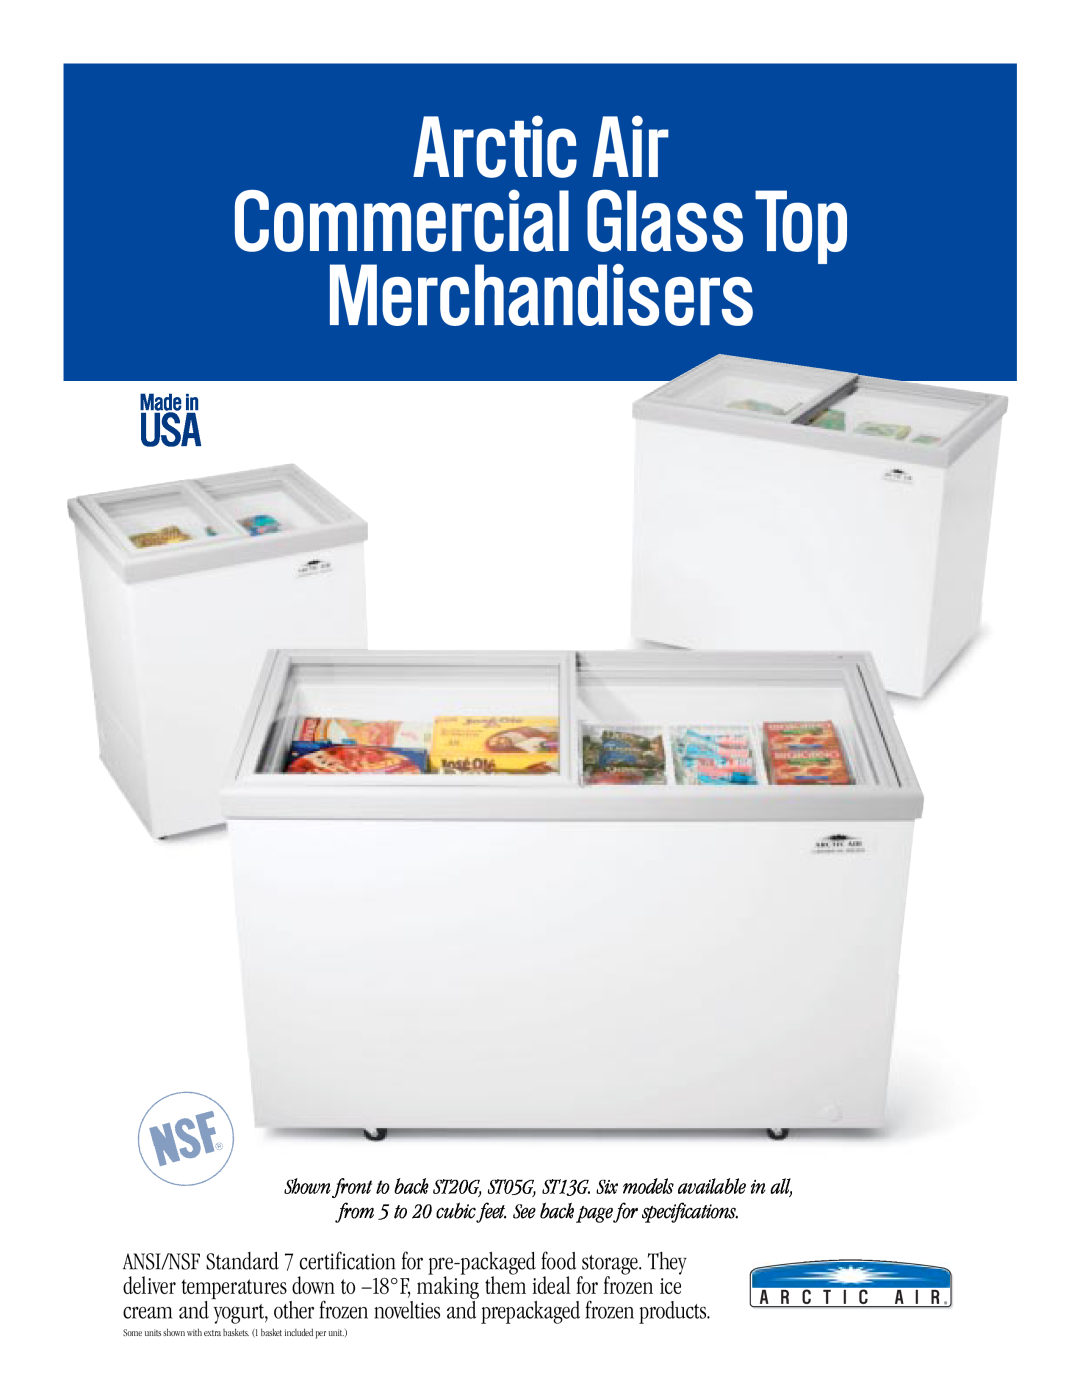 Arctic Air ST13G, ST20G, ST05G specifications Arctic Air Commercial Glass Top Merchandisers 